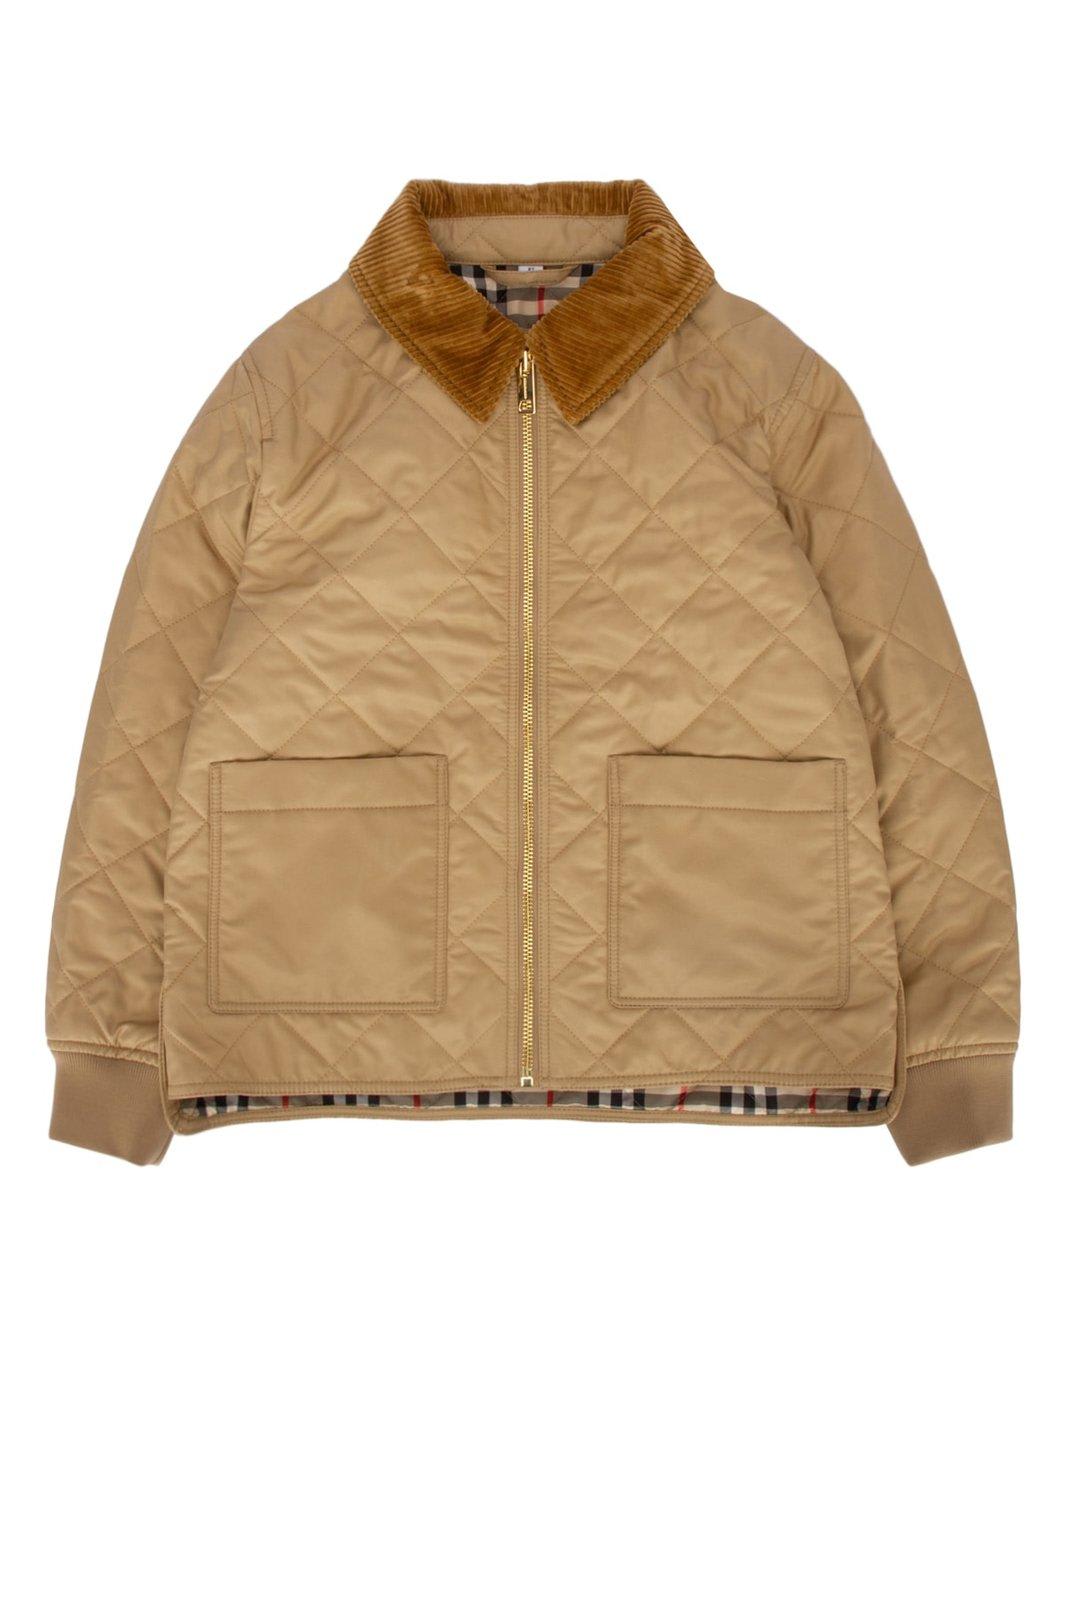 Burberry Kids' Quilted Zipped Jacket In Archive Beige